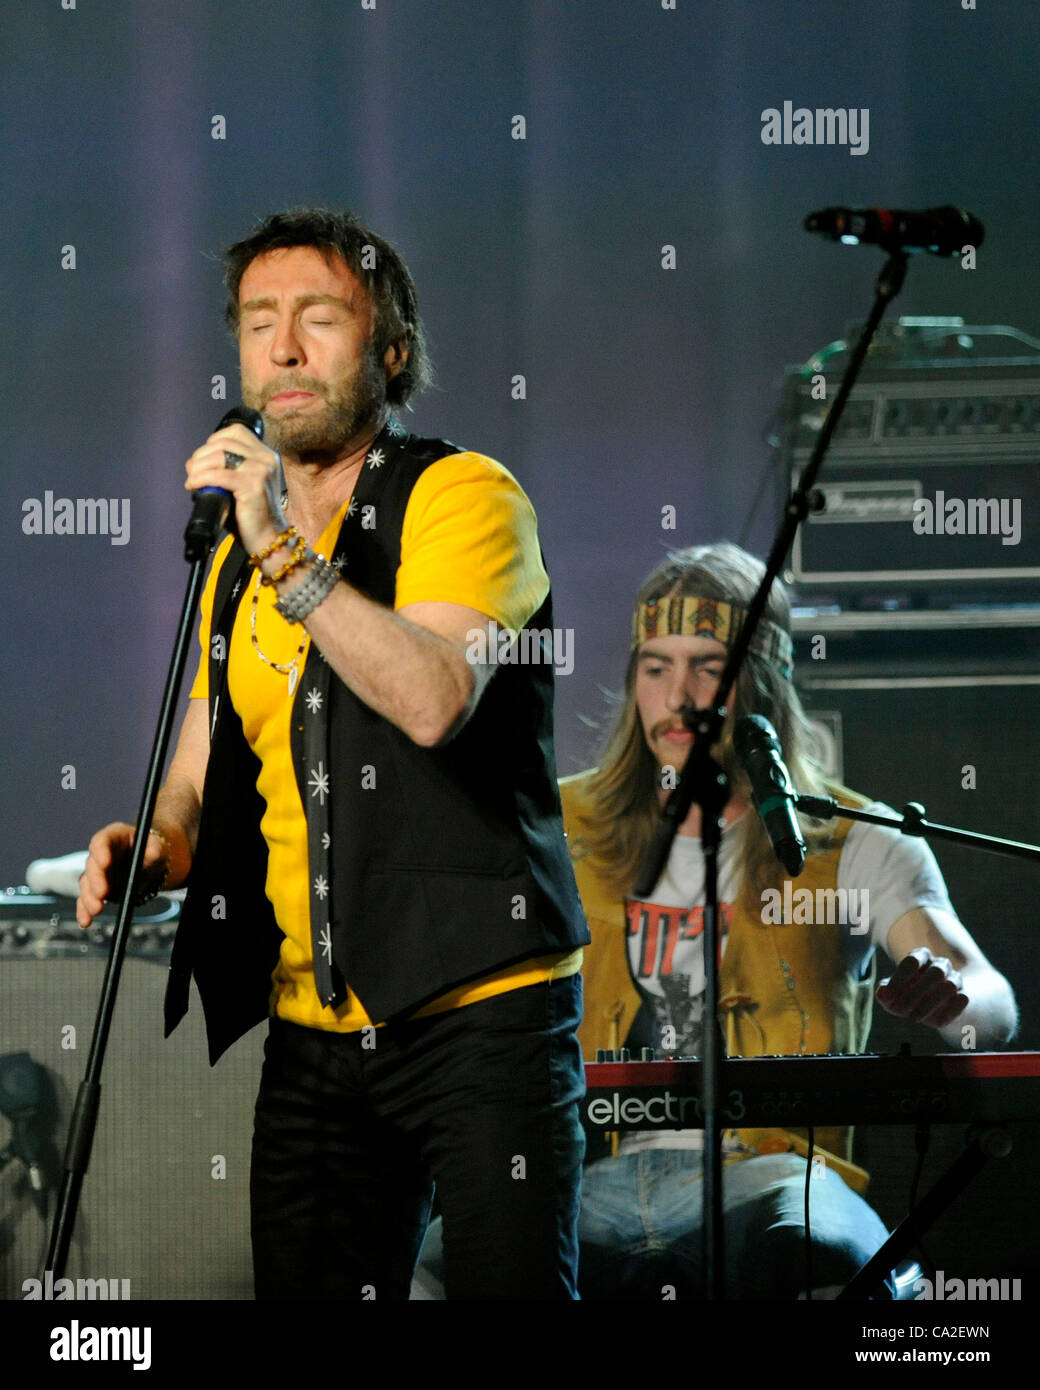 March 24, 2012 - Toronto, Cananda - Paul Rodgers performs on stage with The Sheepdogs at the 12th Annual Indies Awards during the 2012 Slacker Canadian Music Week. (DCP/BRP/N8N) Stock Photo